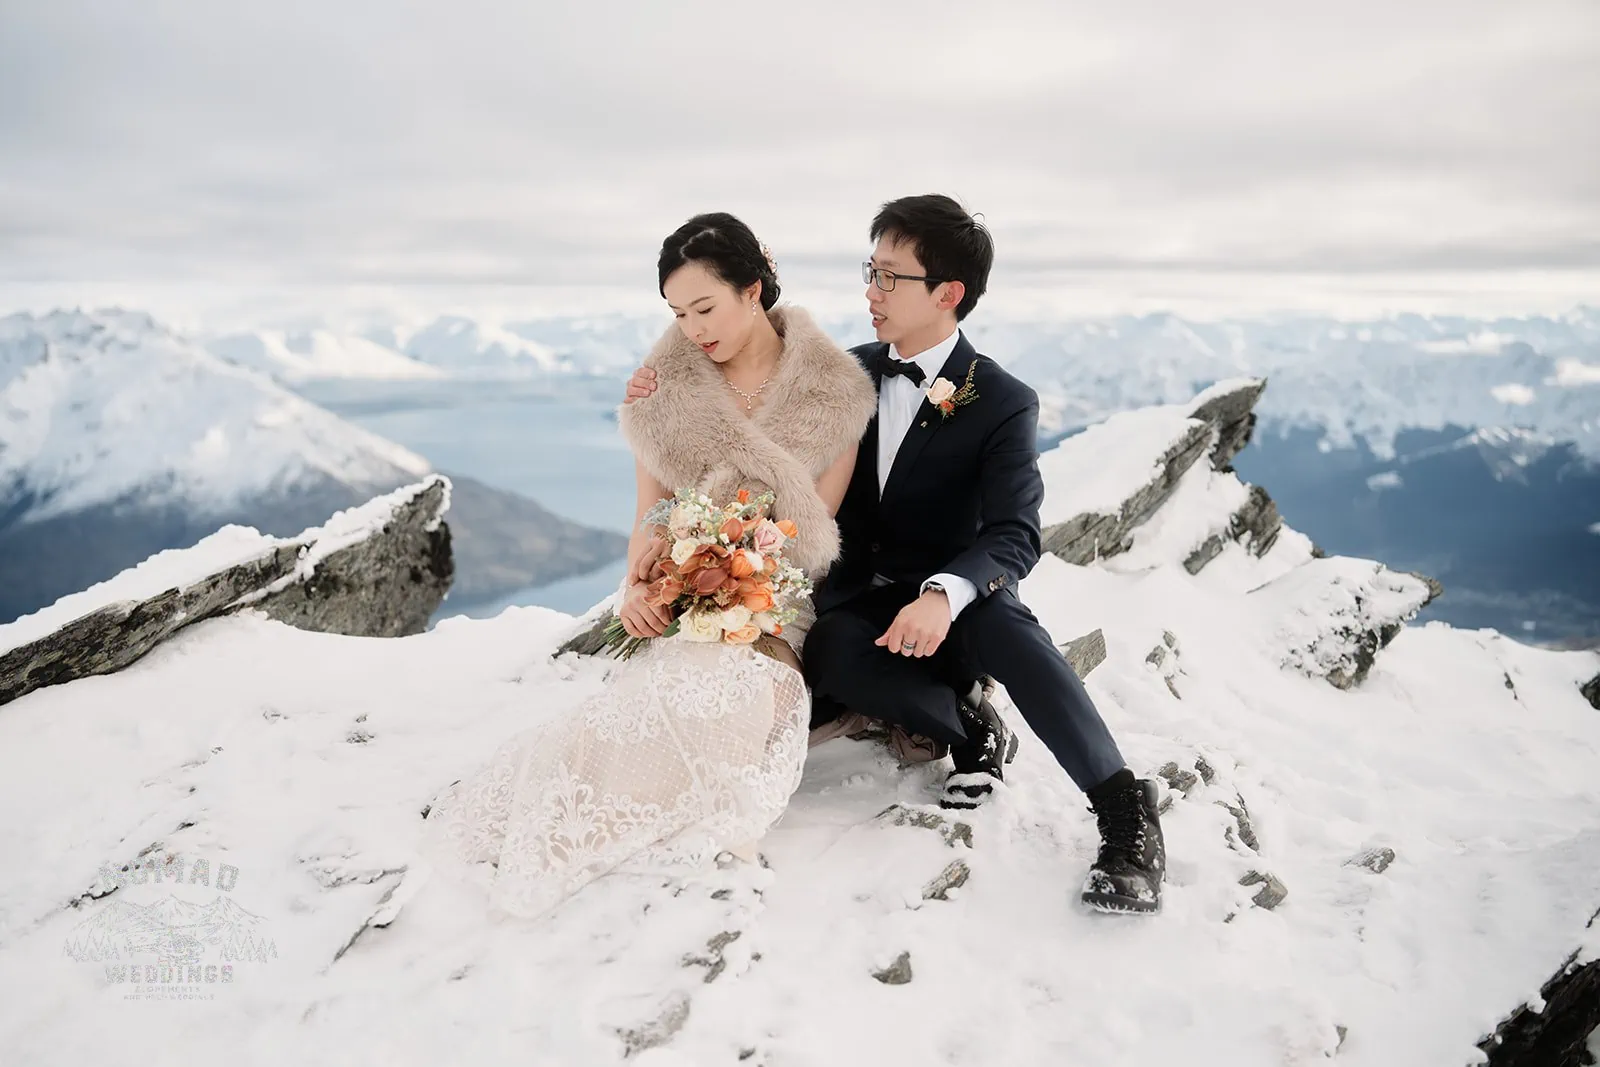 Queenstown, New Zealand: Joanna and Tony captured in a snowy mountaintop during their pre-wedding shoot.